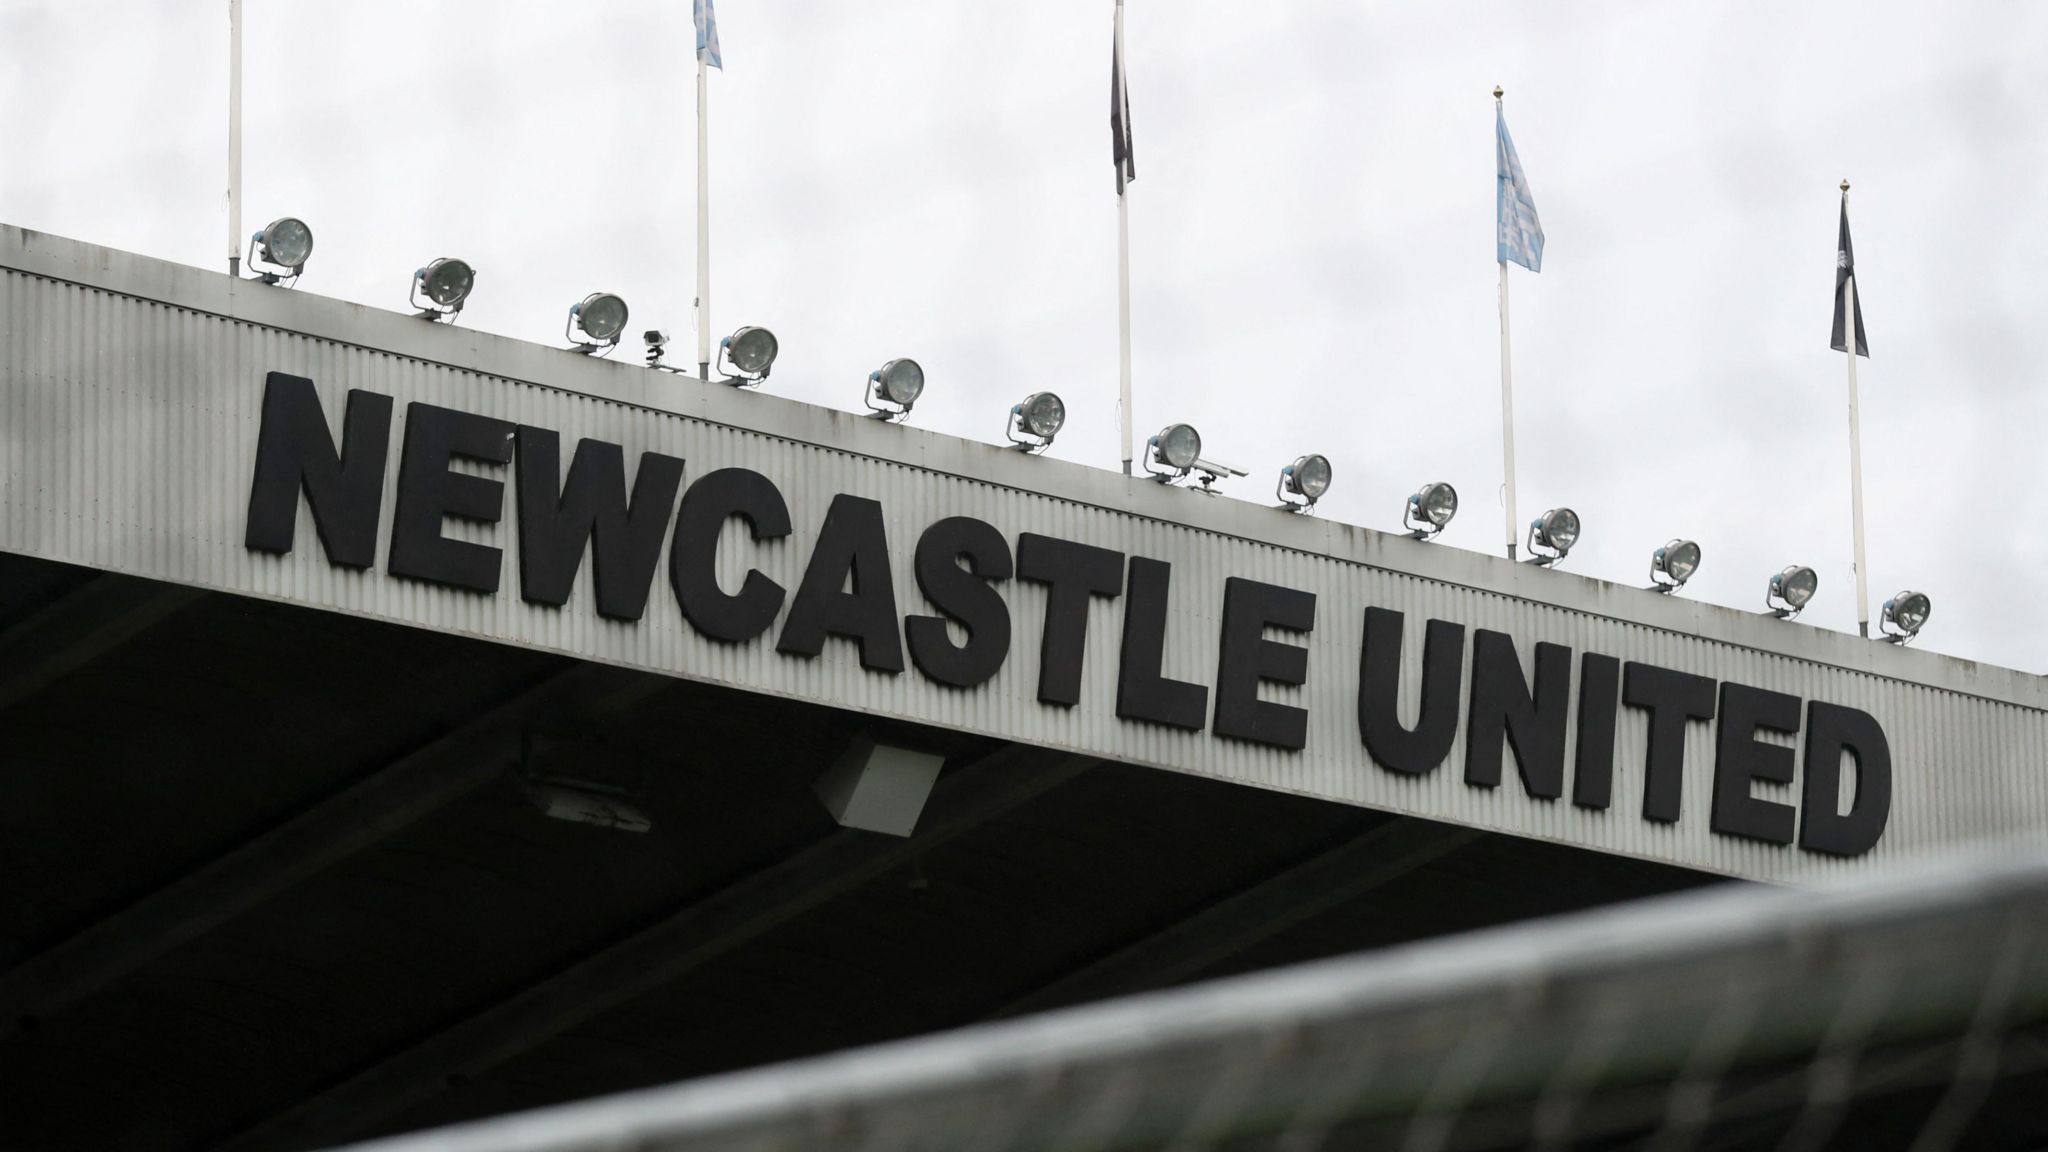 Newcastle United sign at St James' Park